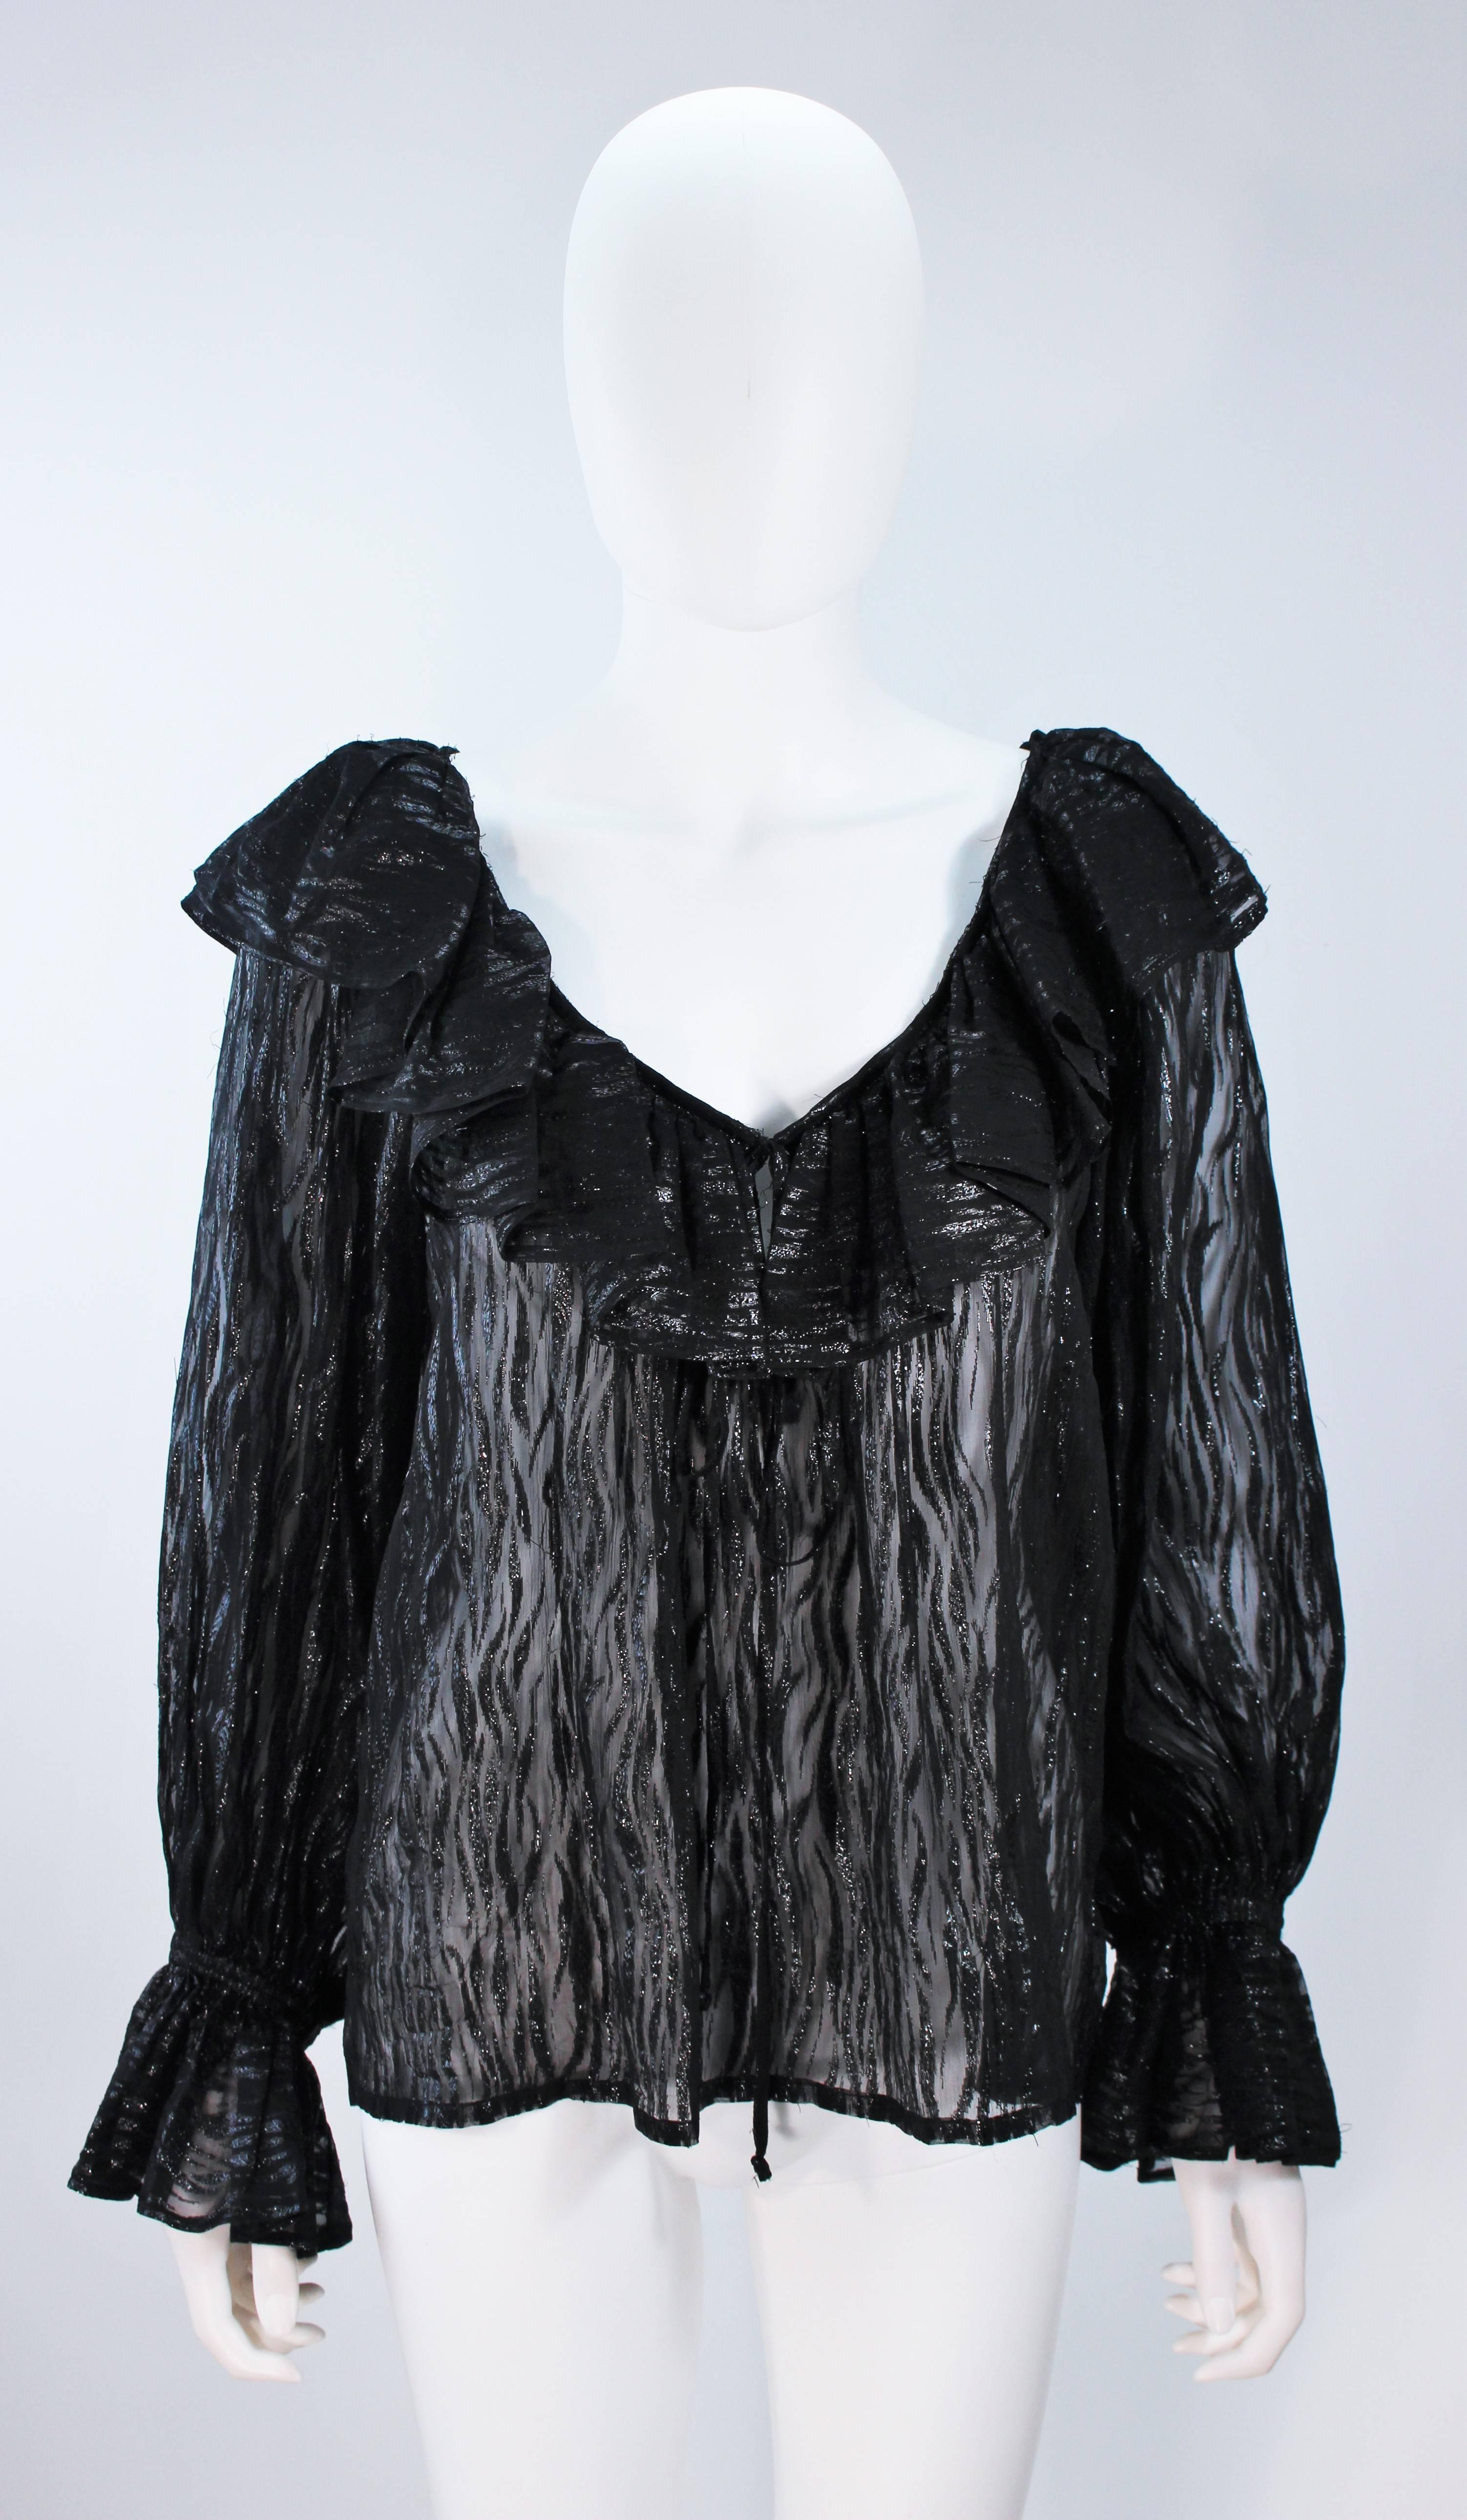 Women's YVES SAINT LAURENT Black Printed Sheer Silk Blouse with Fuzzy Lame Size 4-6